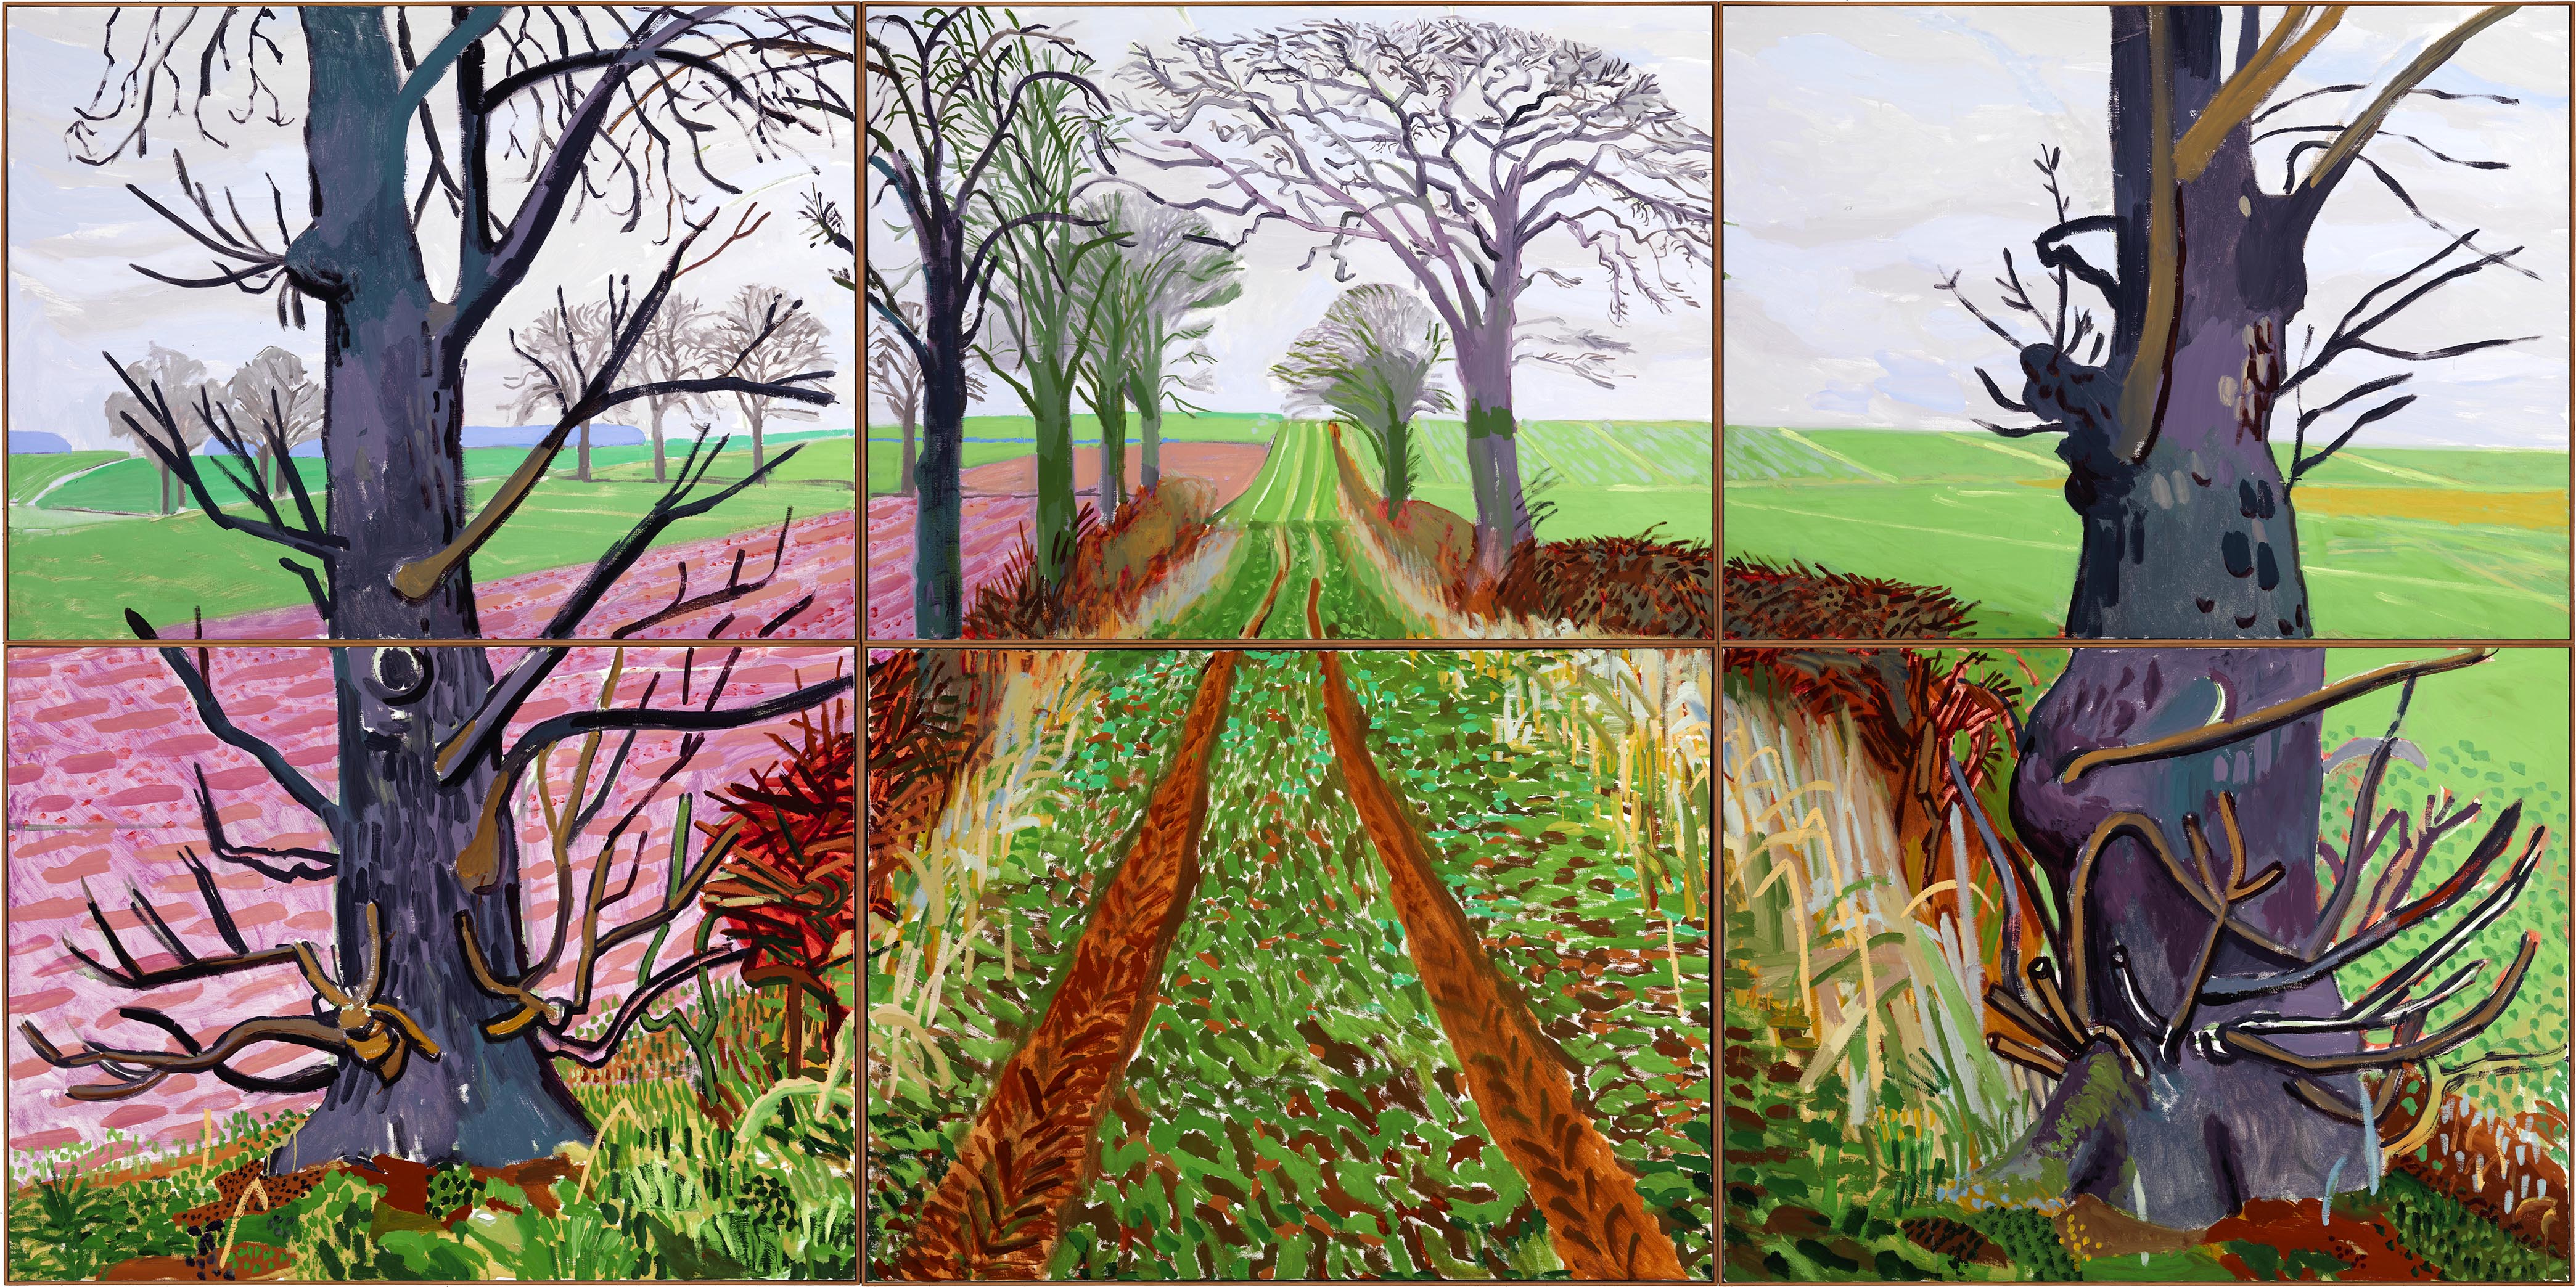 "A CLOSER WINTER TUNNEL, FEBRUARY - MARCH" 2006 OIL ON 6 CANVASES (36 X48" EA.) 72 X 144" OVERALL © DAVID HOCKNEY COLLECTION: ART GALLERY OF NEW SOUTH WALES, SYDNEY PHOTO CREDIT: RICHARD SCHMIDT